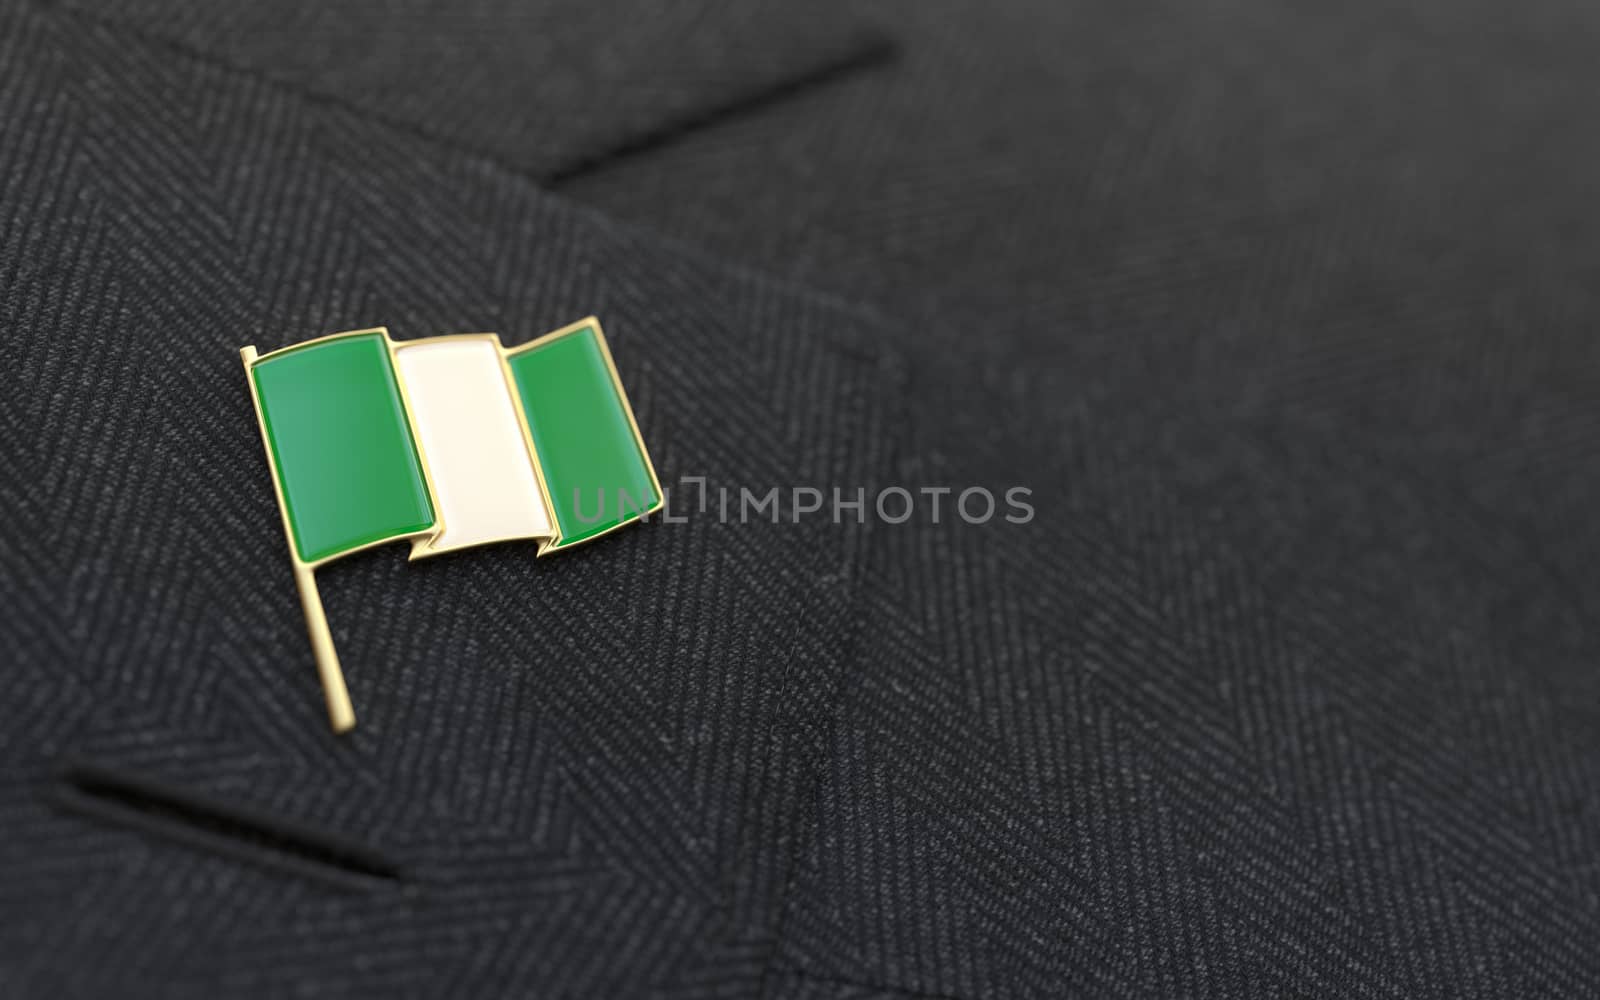 Nigeria flag lapel pin on the collar of a business suit jacket shows patriotism